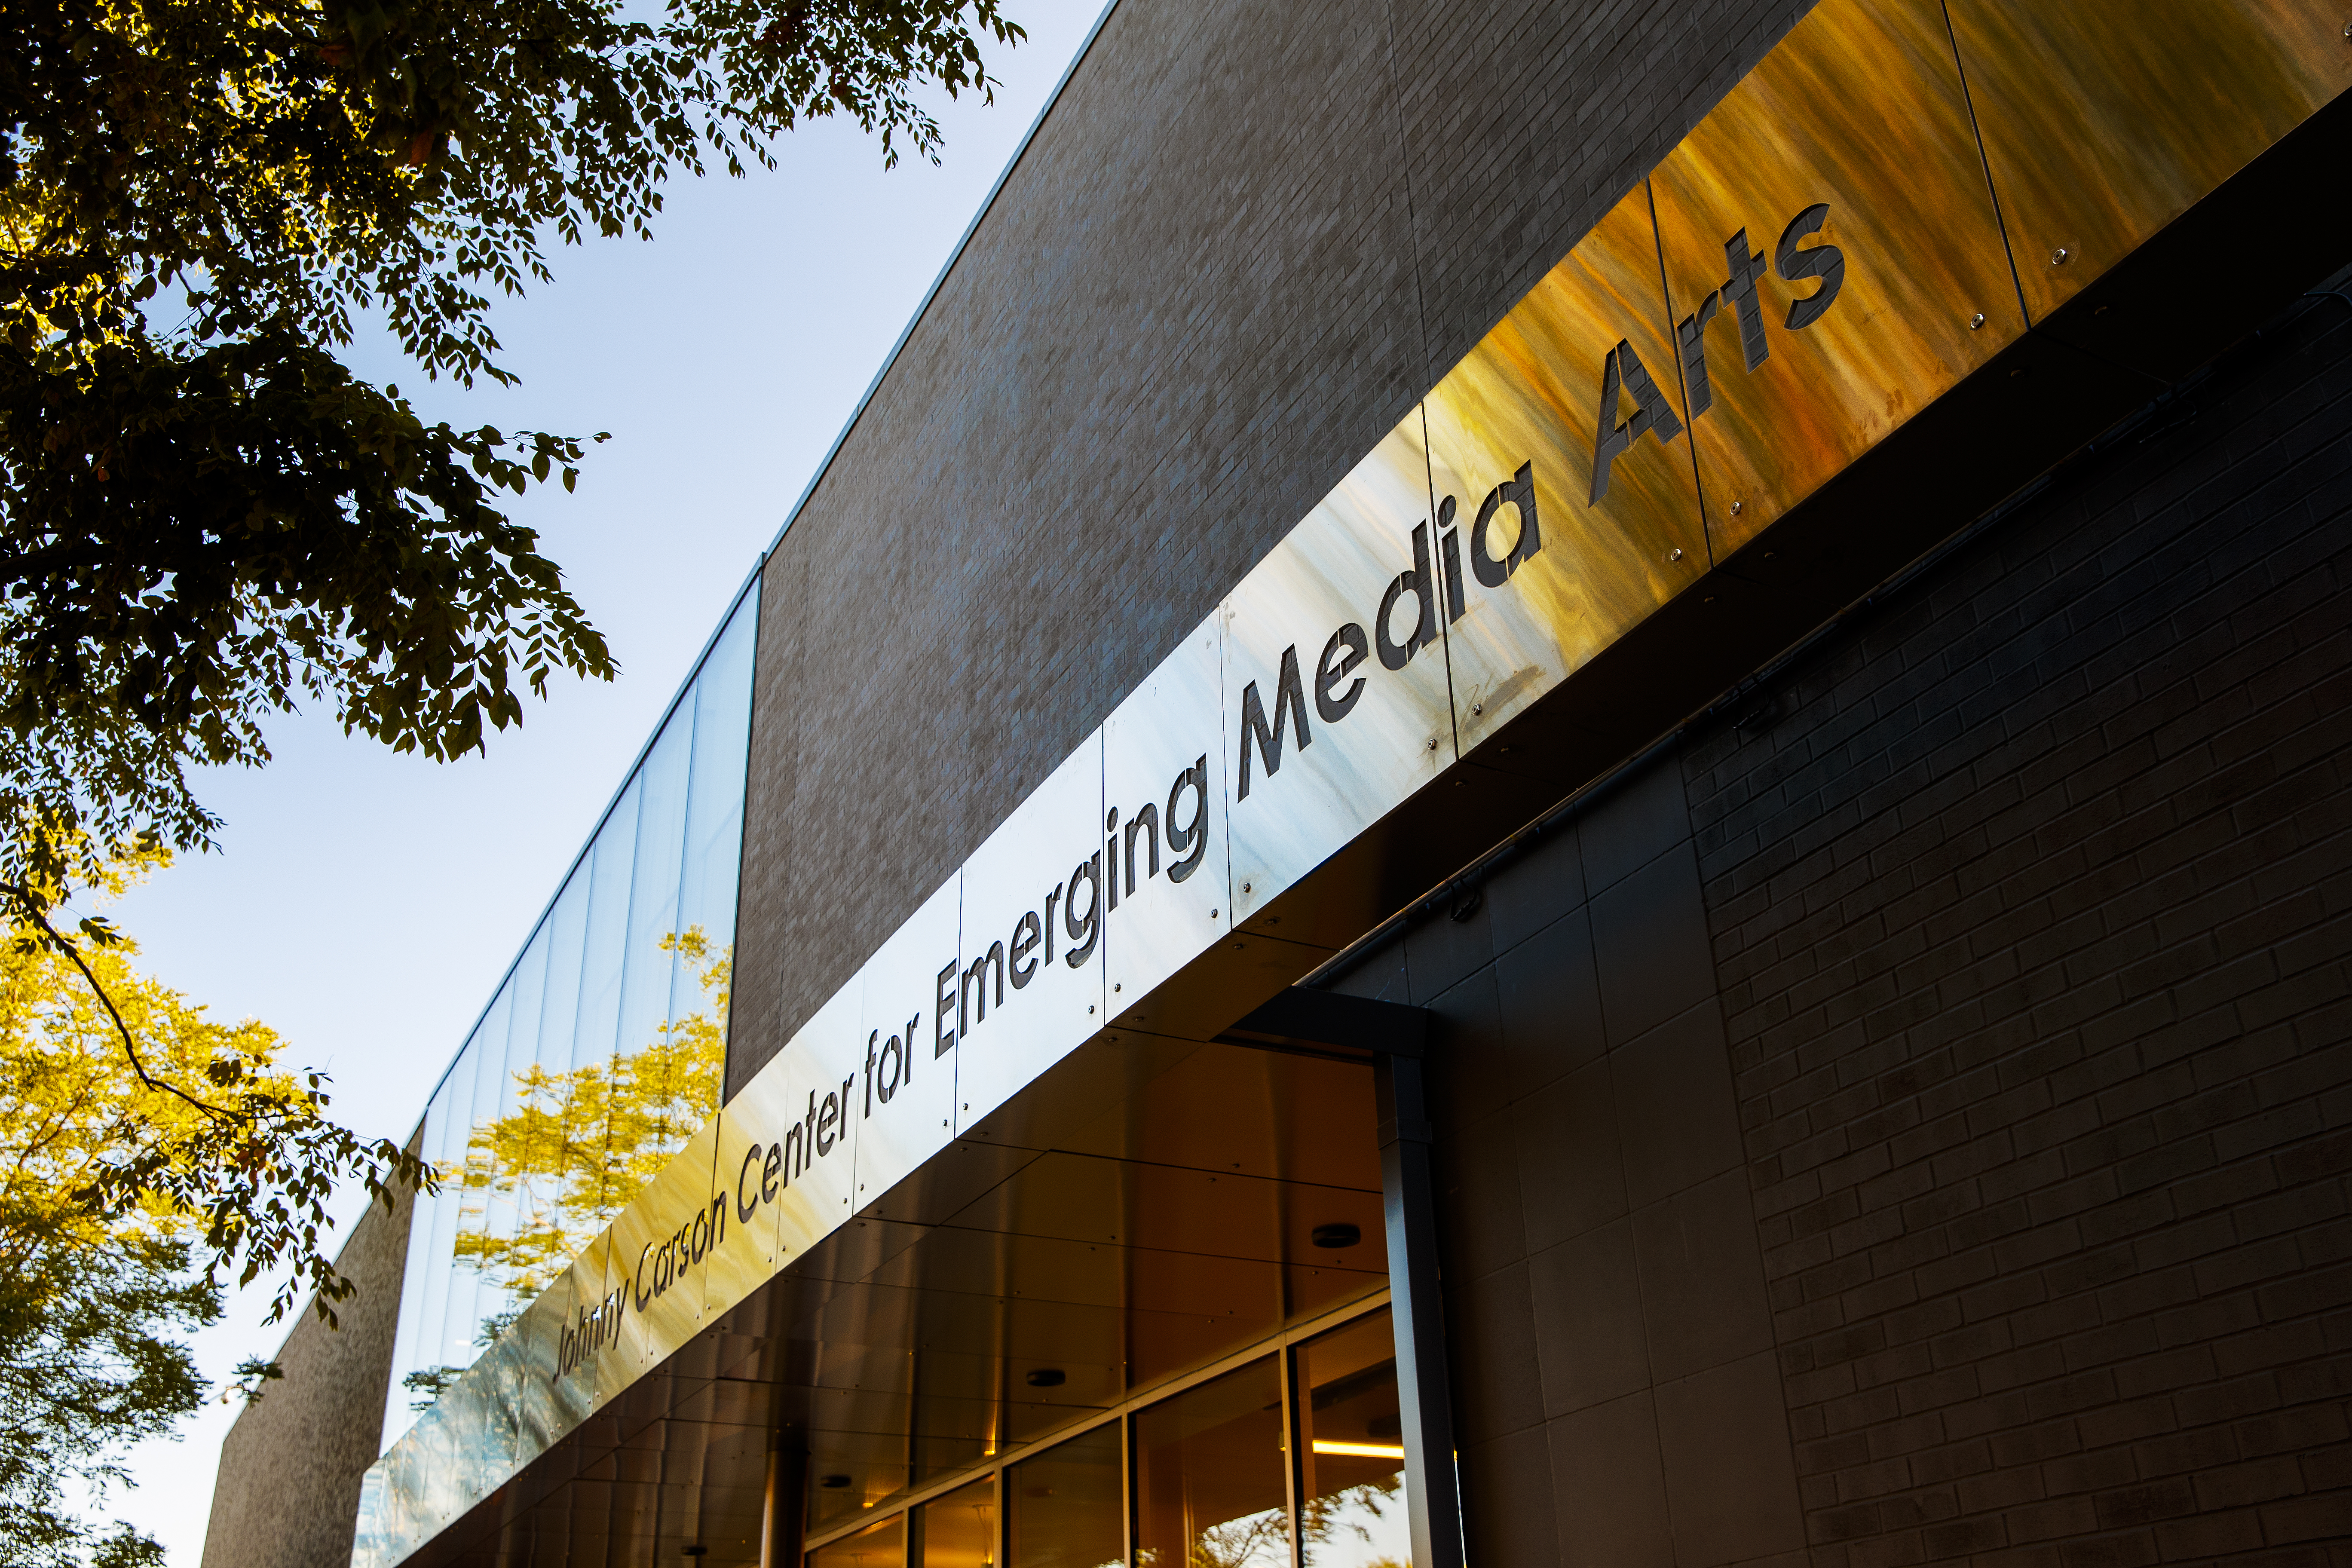 y Carson Center for Emerging Media Arts has received funding from the Nebraska Research Initiative to establish the Carson Center-Design and Innovation Core (DIC), a Core Research Facility.